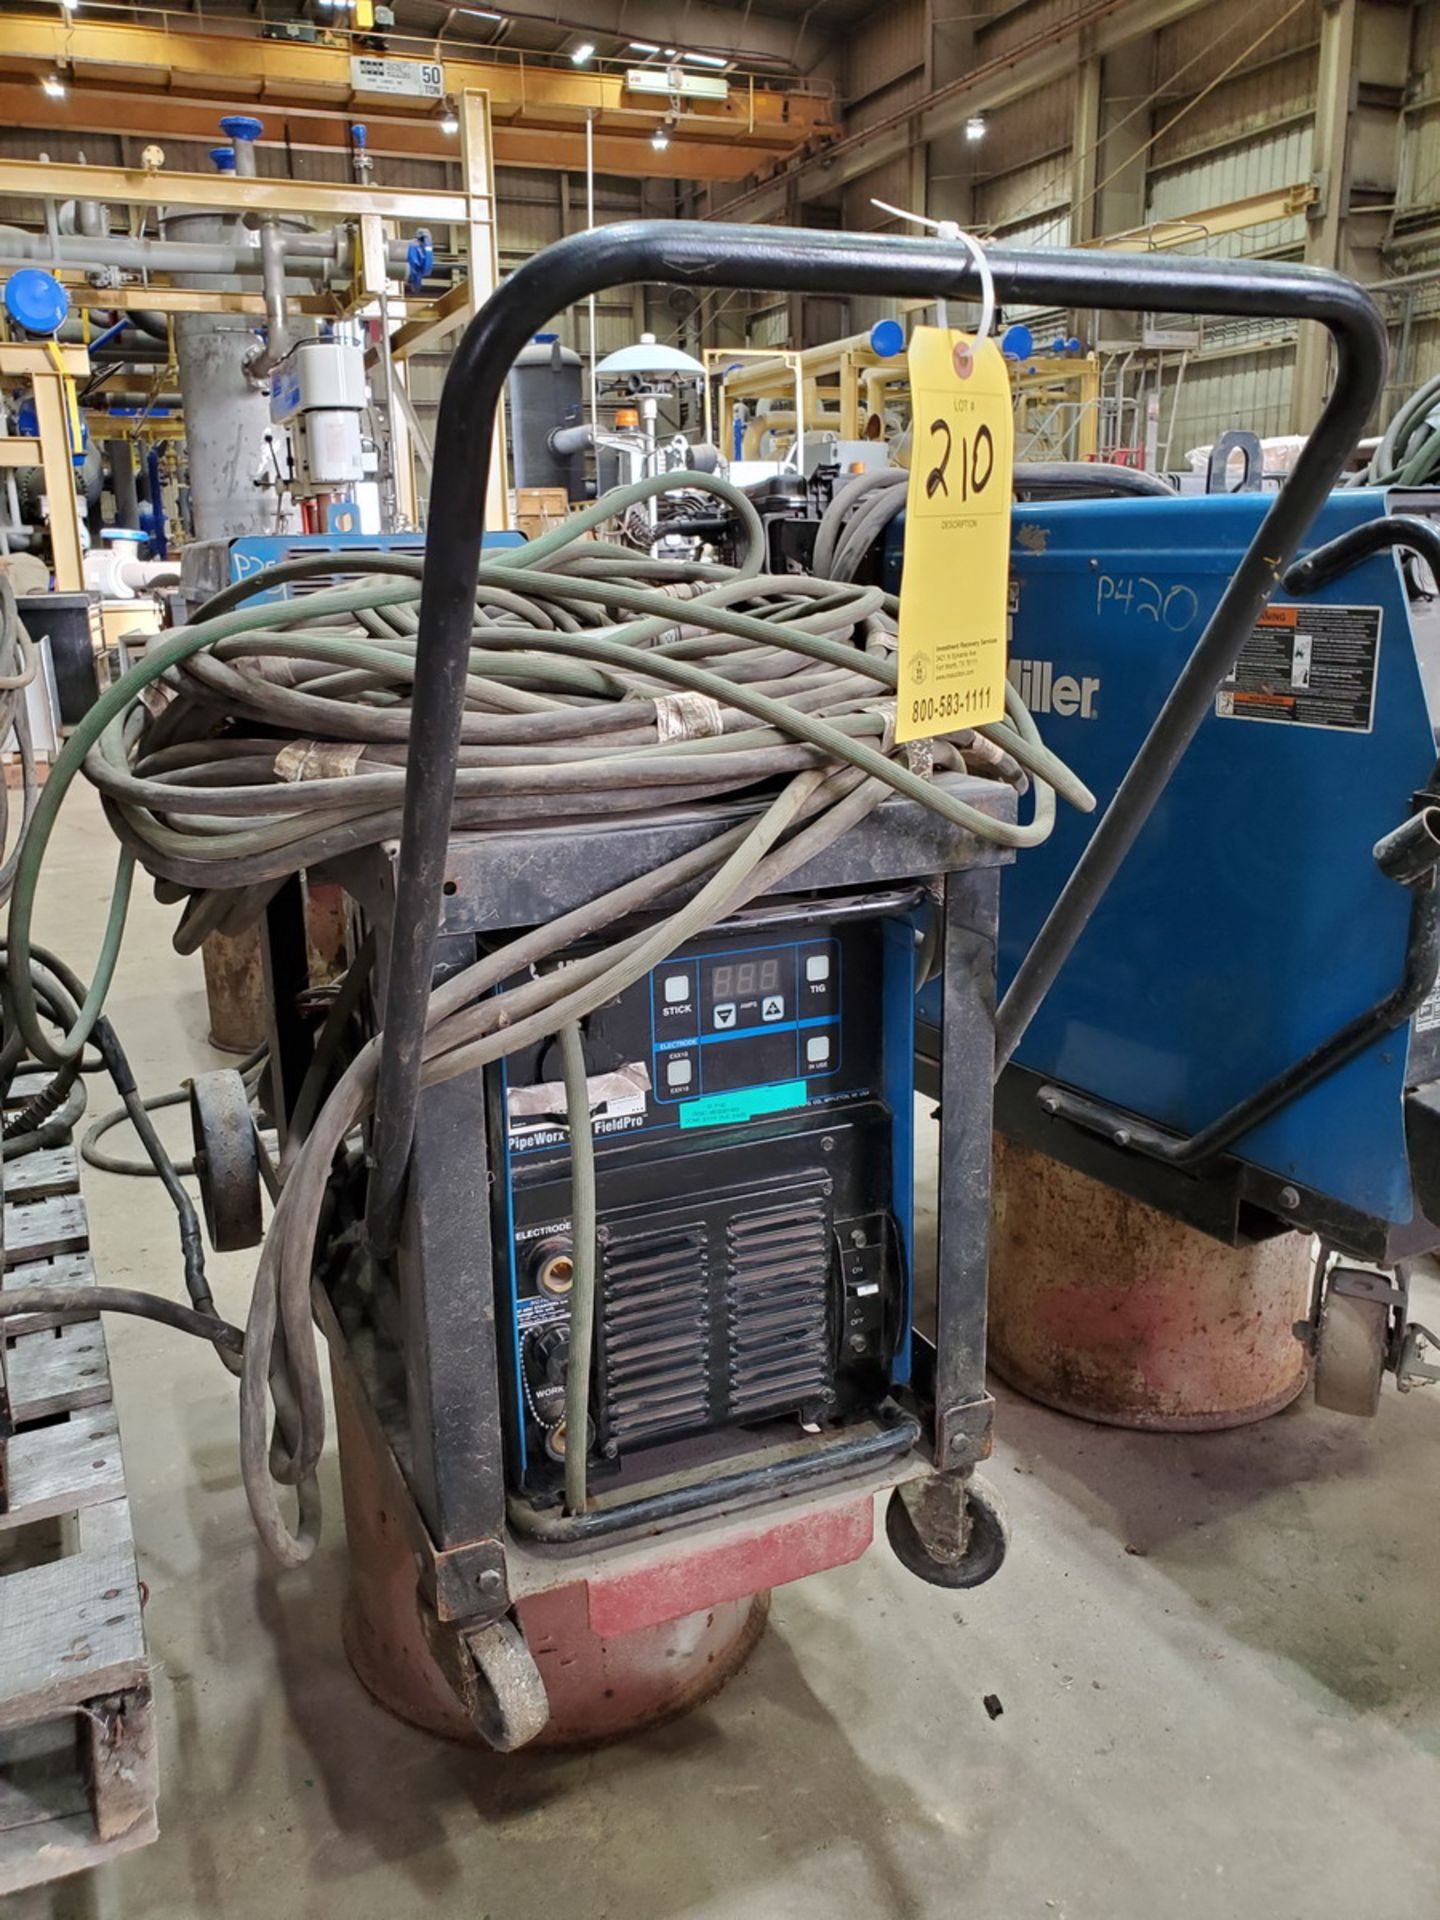 Miller Pipeworx 350 FieldPro Multiprocessing Welder 350A, 230/575V, 50/60HZ, 3PH - Image 3 of 6